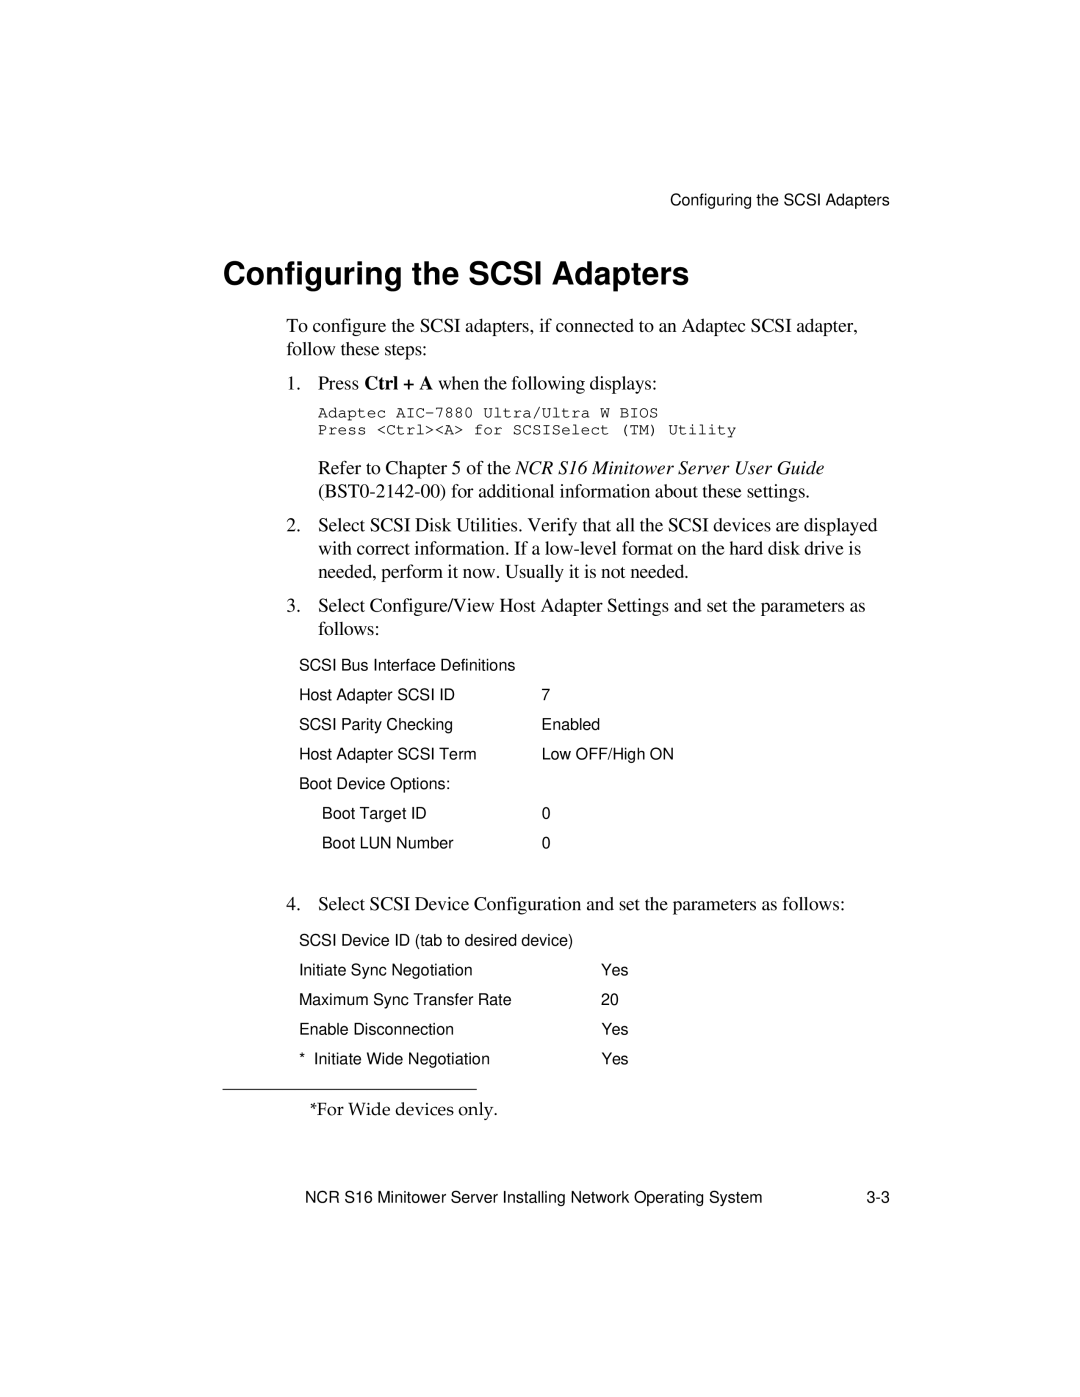 NCR S16 manual Configuring the Scsi Adapters, For Wide devices only 